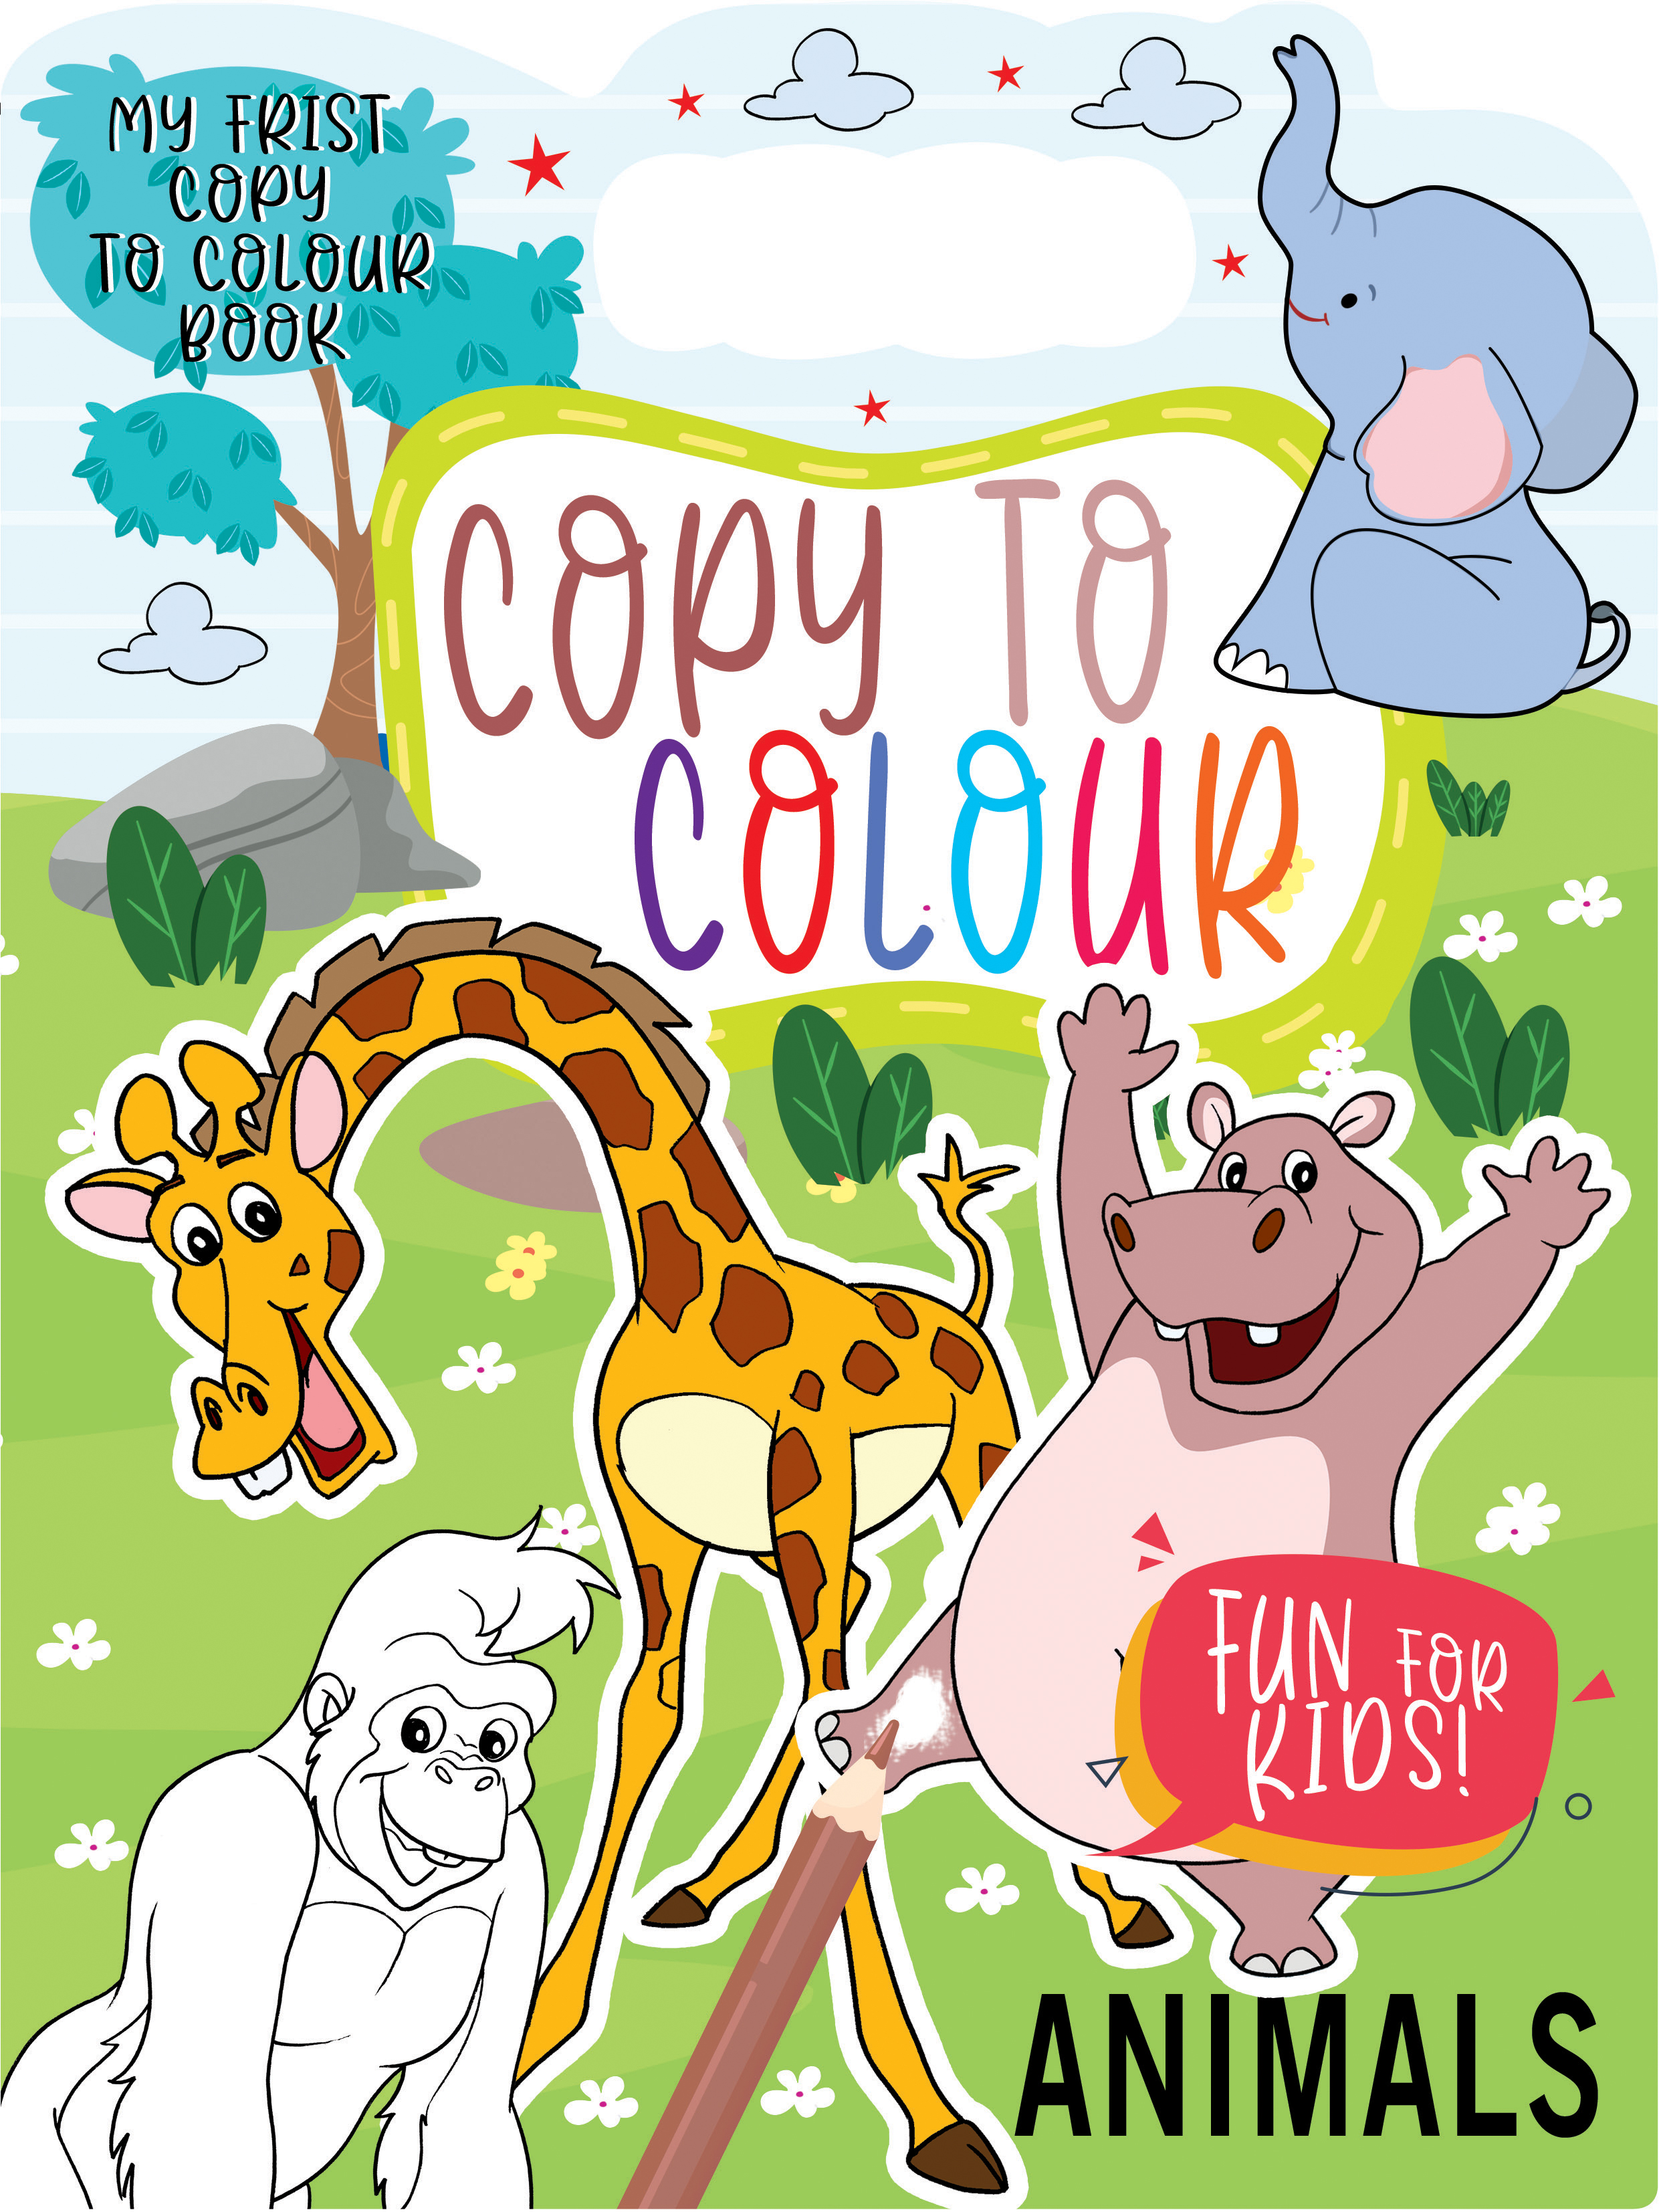 Easy Colour - Cool Copy Colouring(handle Die cut) Animals